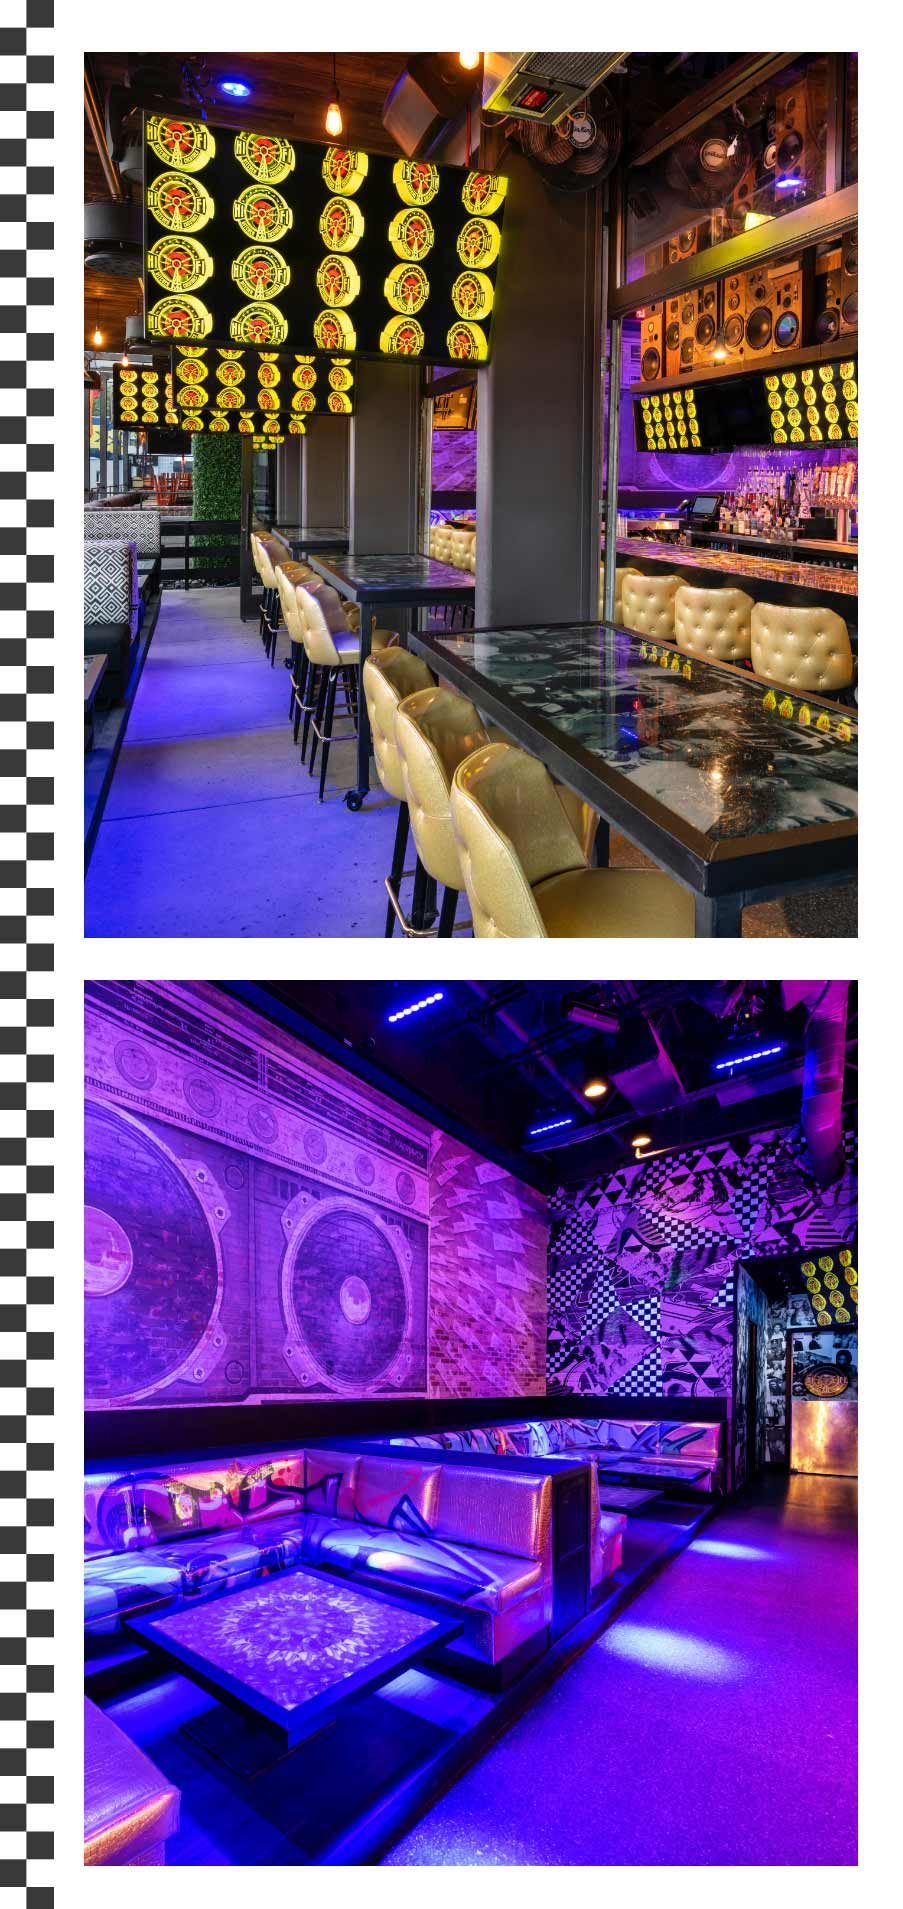 1) Photo of High Top Table Seating and Outdoor TV's. 2) Photo of VIP Booths and Wall Mural.